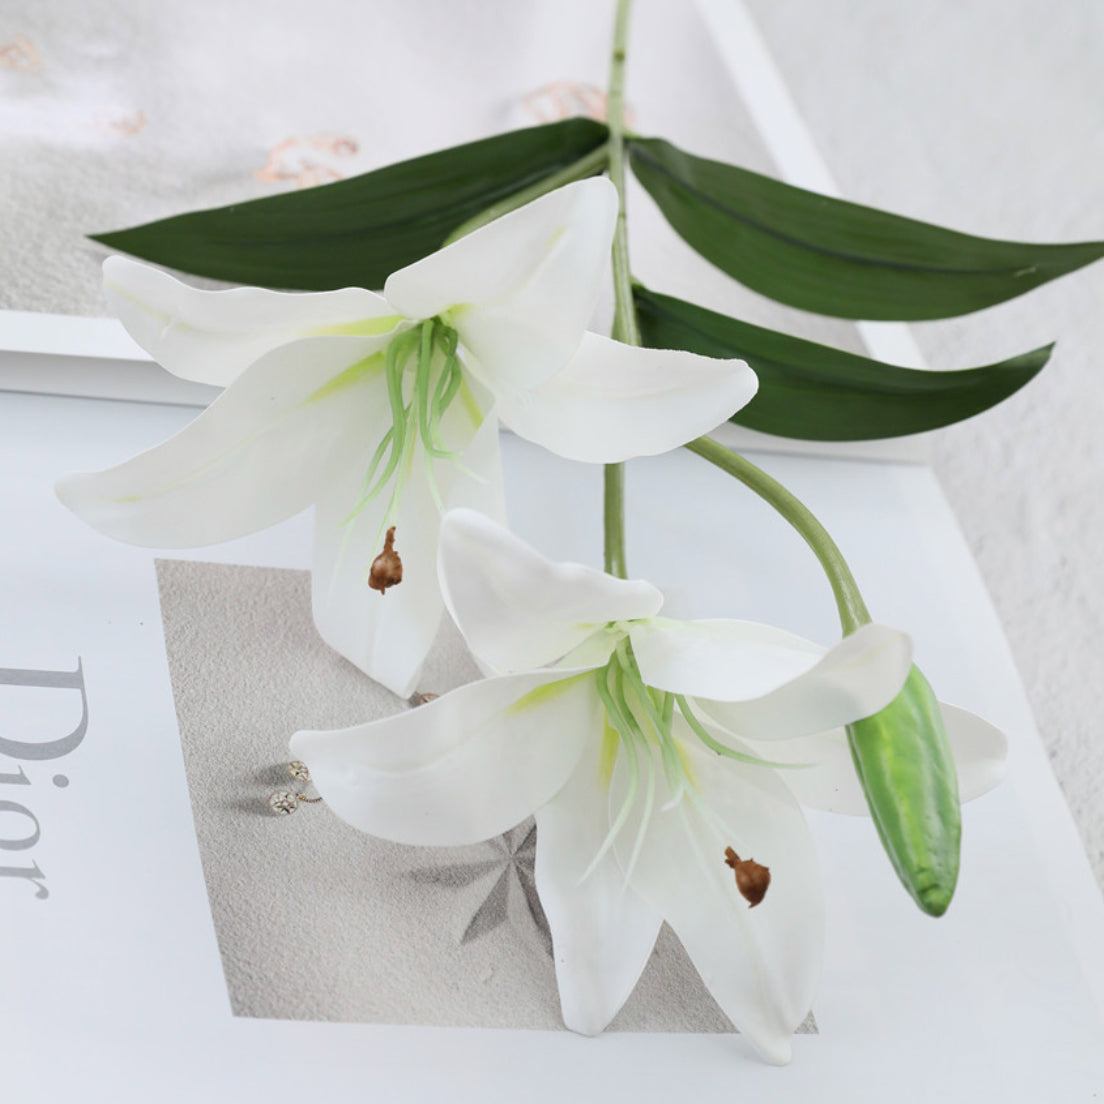 How to Grow and Care for 'Stargazer' Lily